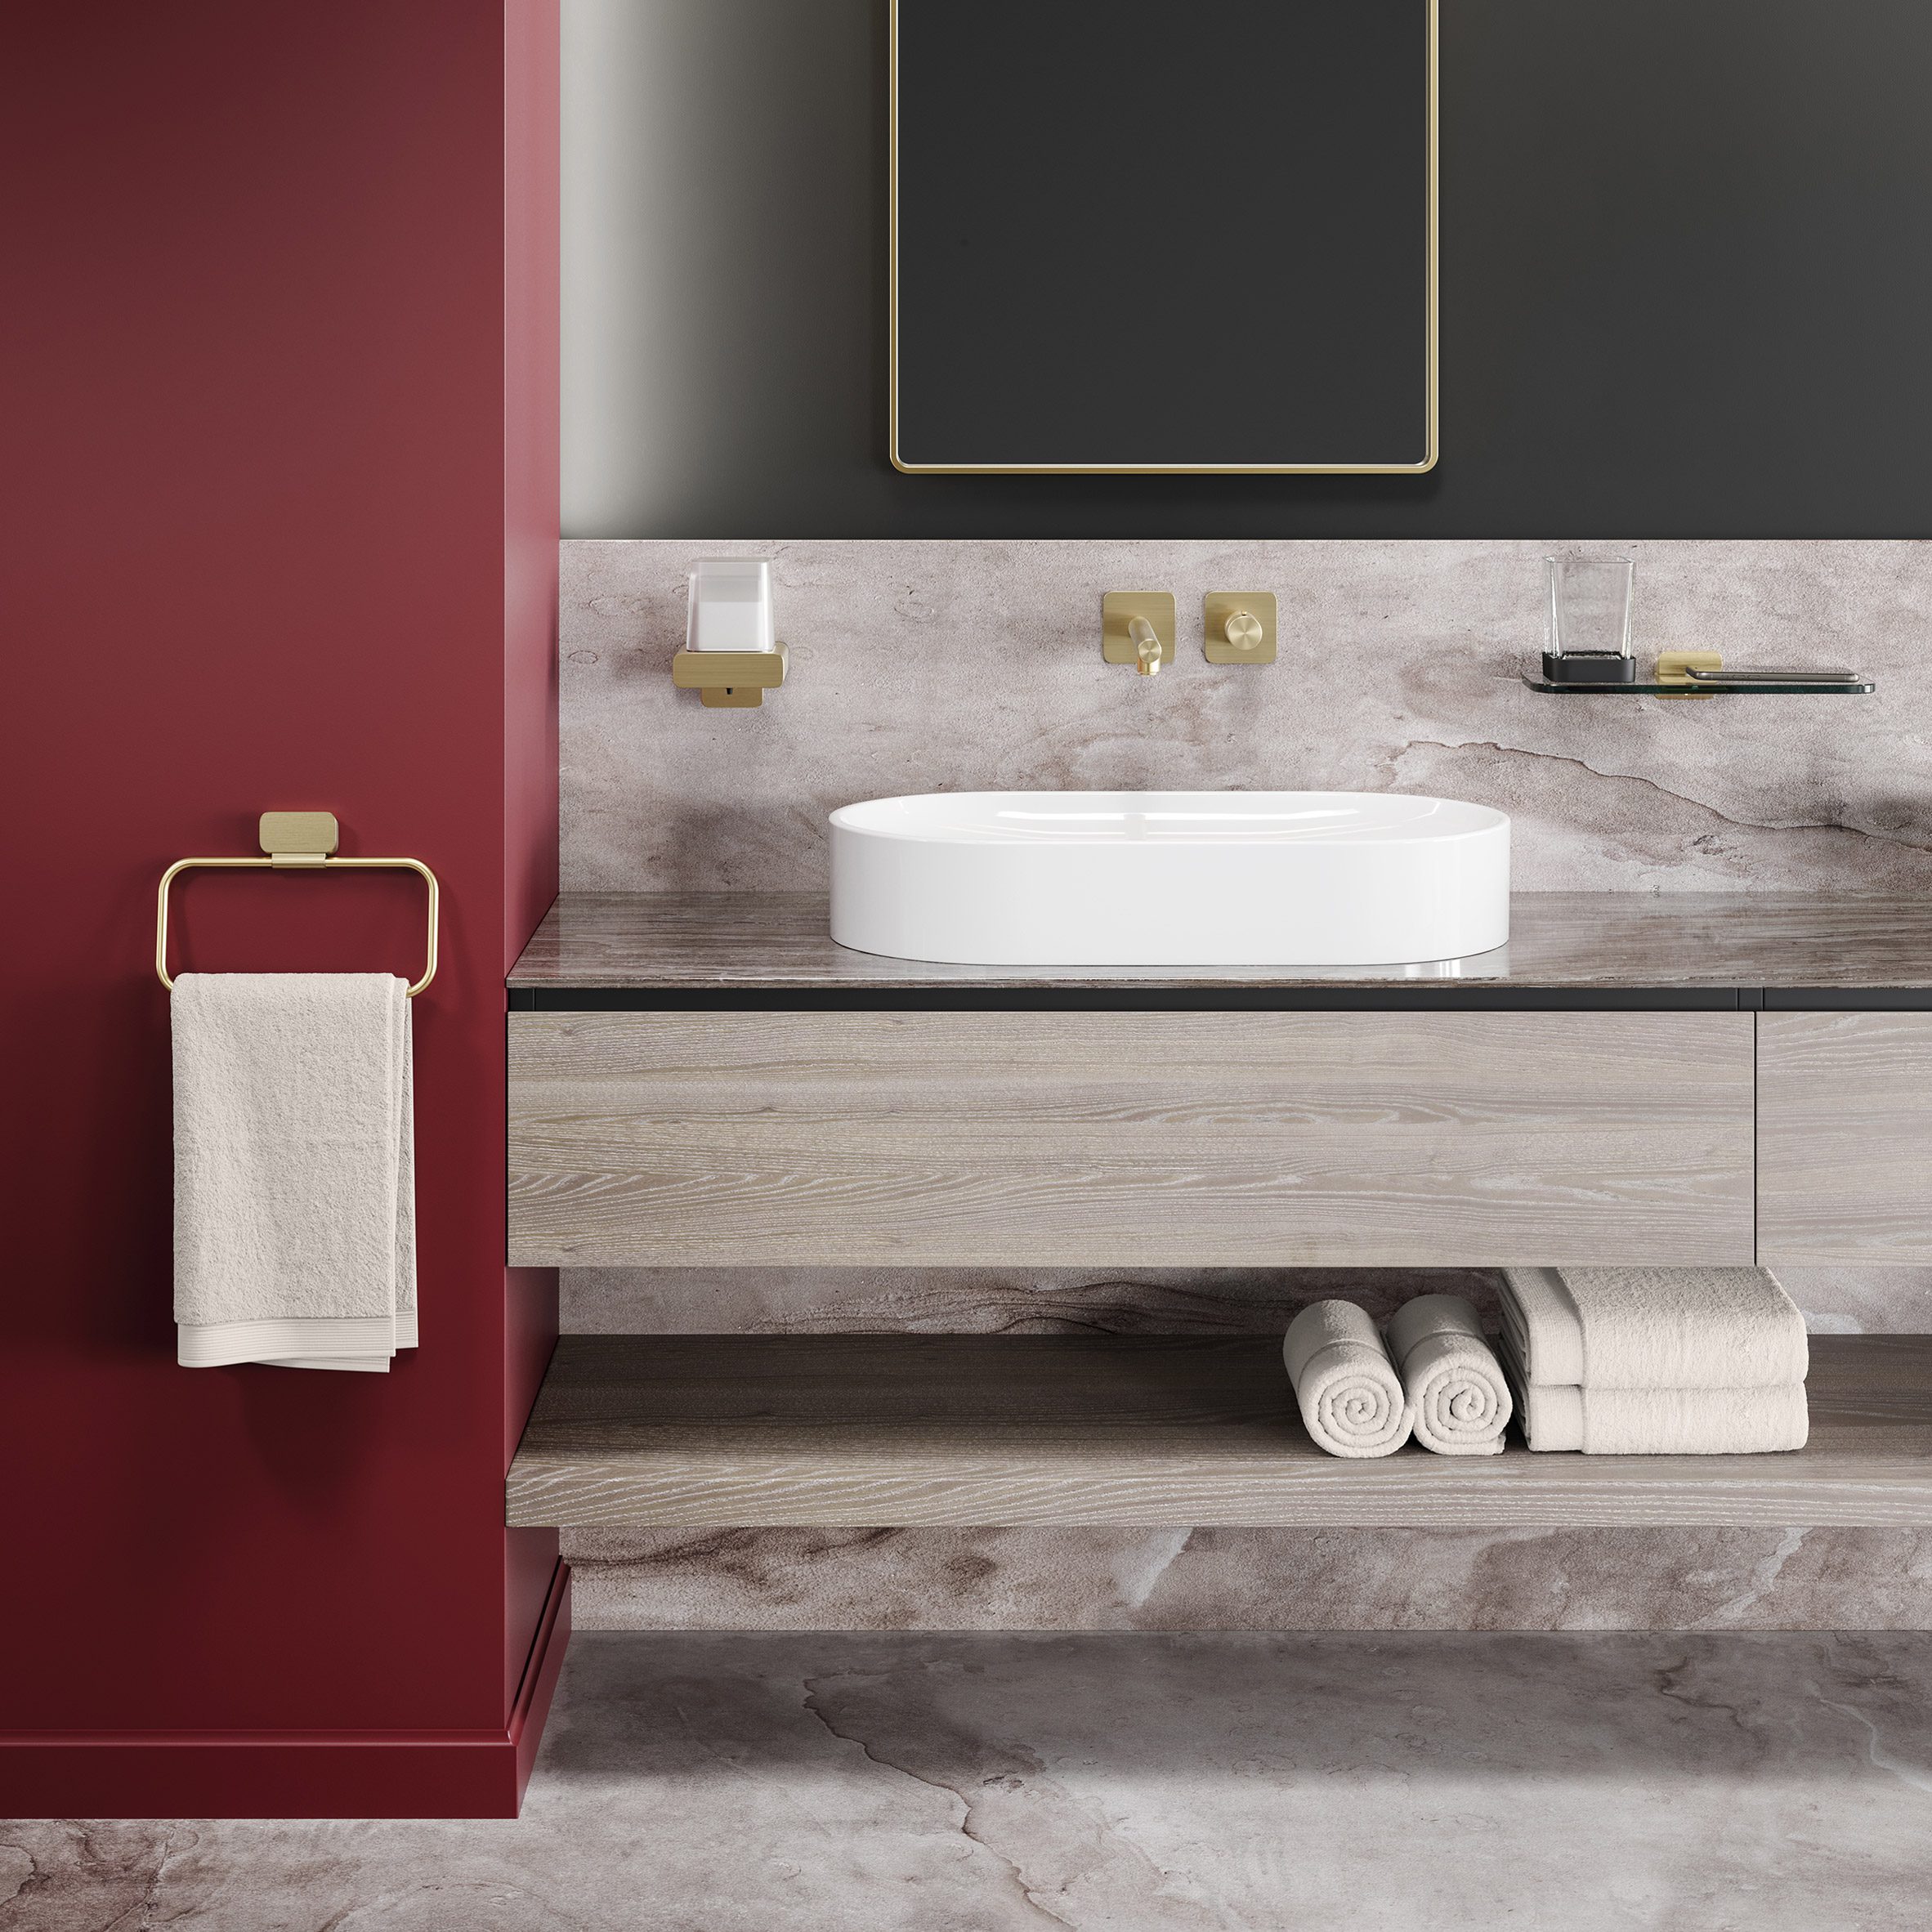 Shift bathroom accessories collection by VanBerlo for Geesa